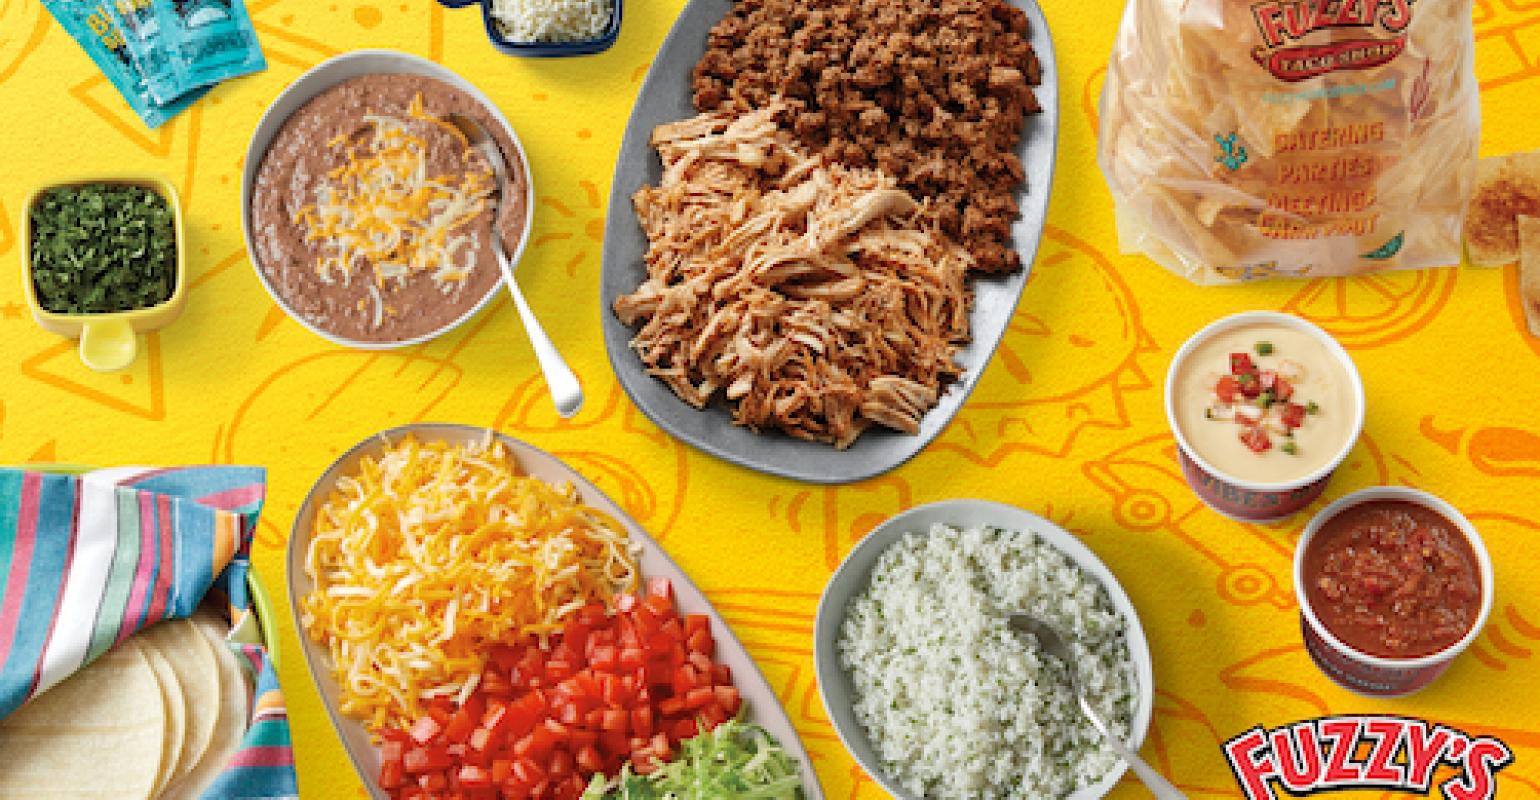 fuzzy-s-taco-shop-launches-online-ordering-for-catering-nation-s